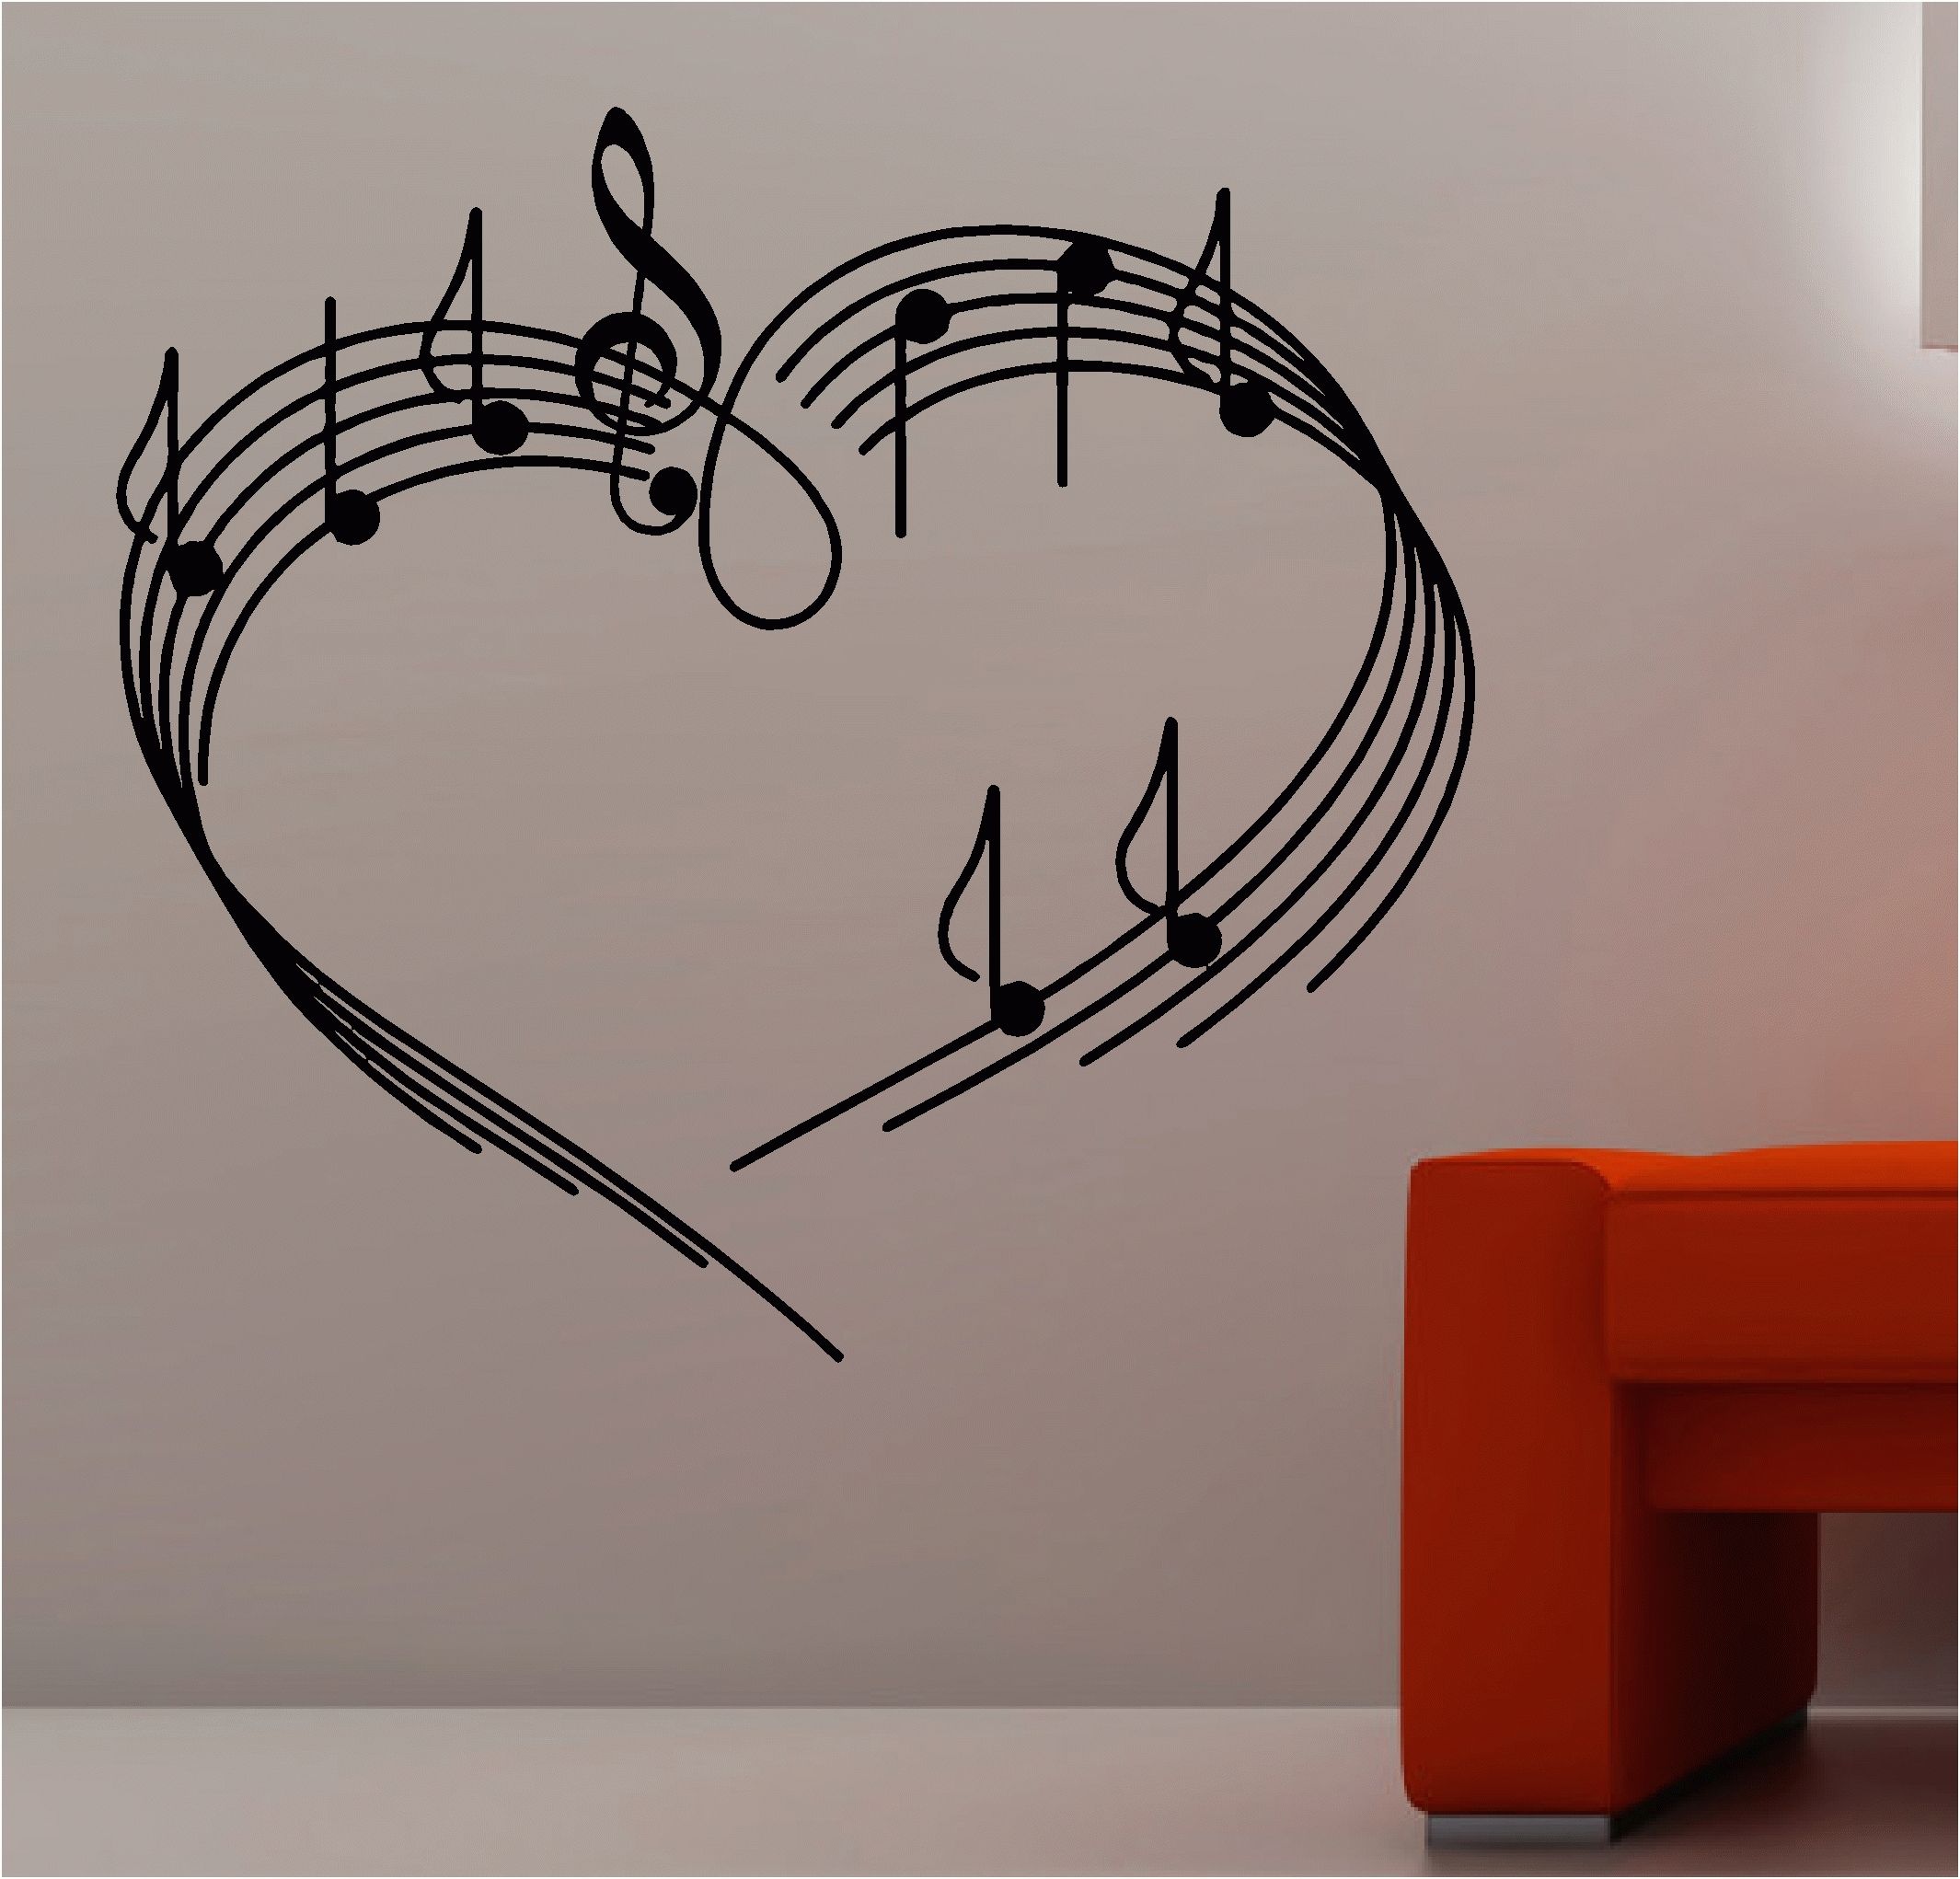 2017 Music Note Art For Walls Regarding Inspiring Design Ideas Musical Wall Art With Music Notes As A (View 5 of 15)